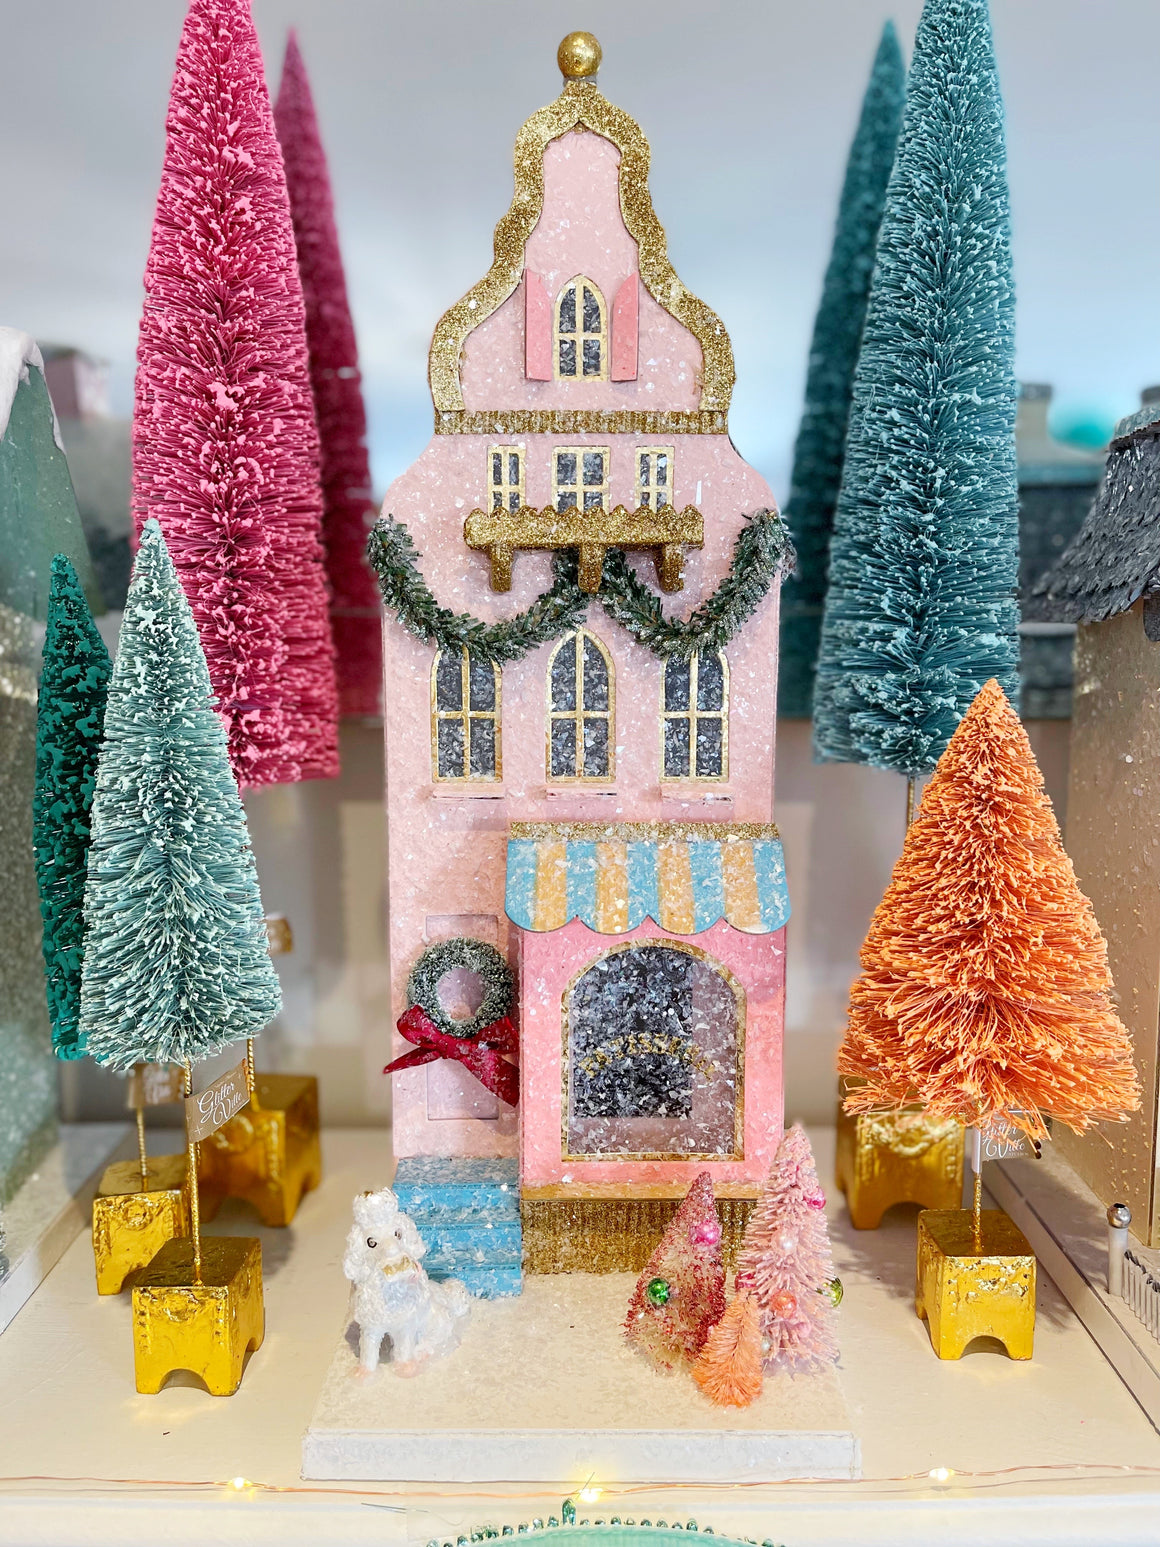 HEIRLOOM HOLIDAY DECOR - CODY FOSTER PINK PATISSERIE